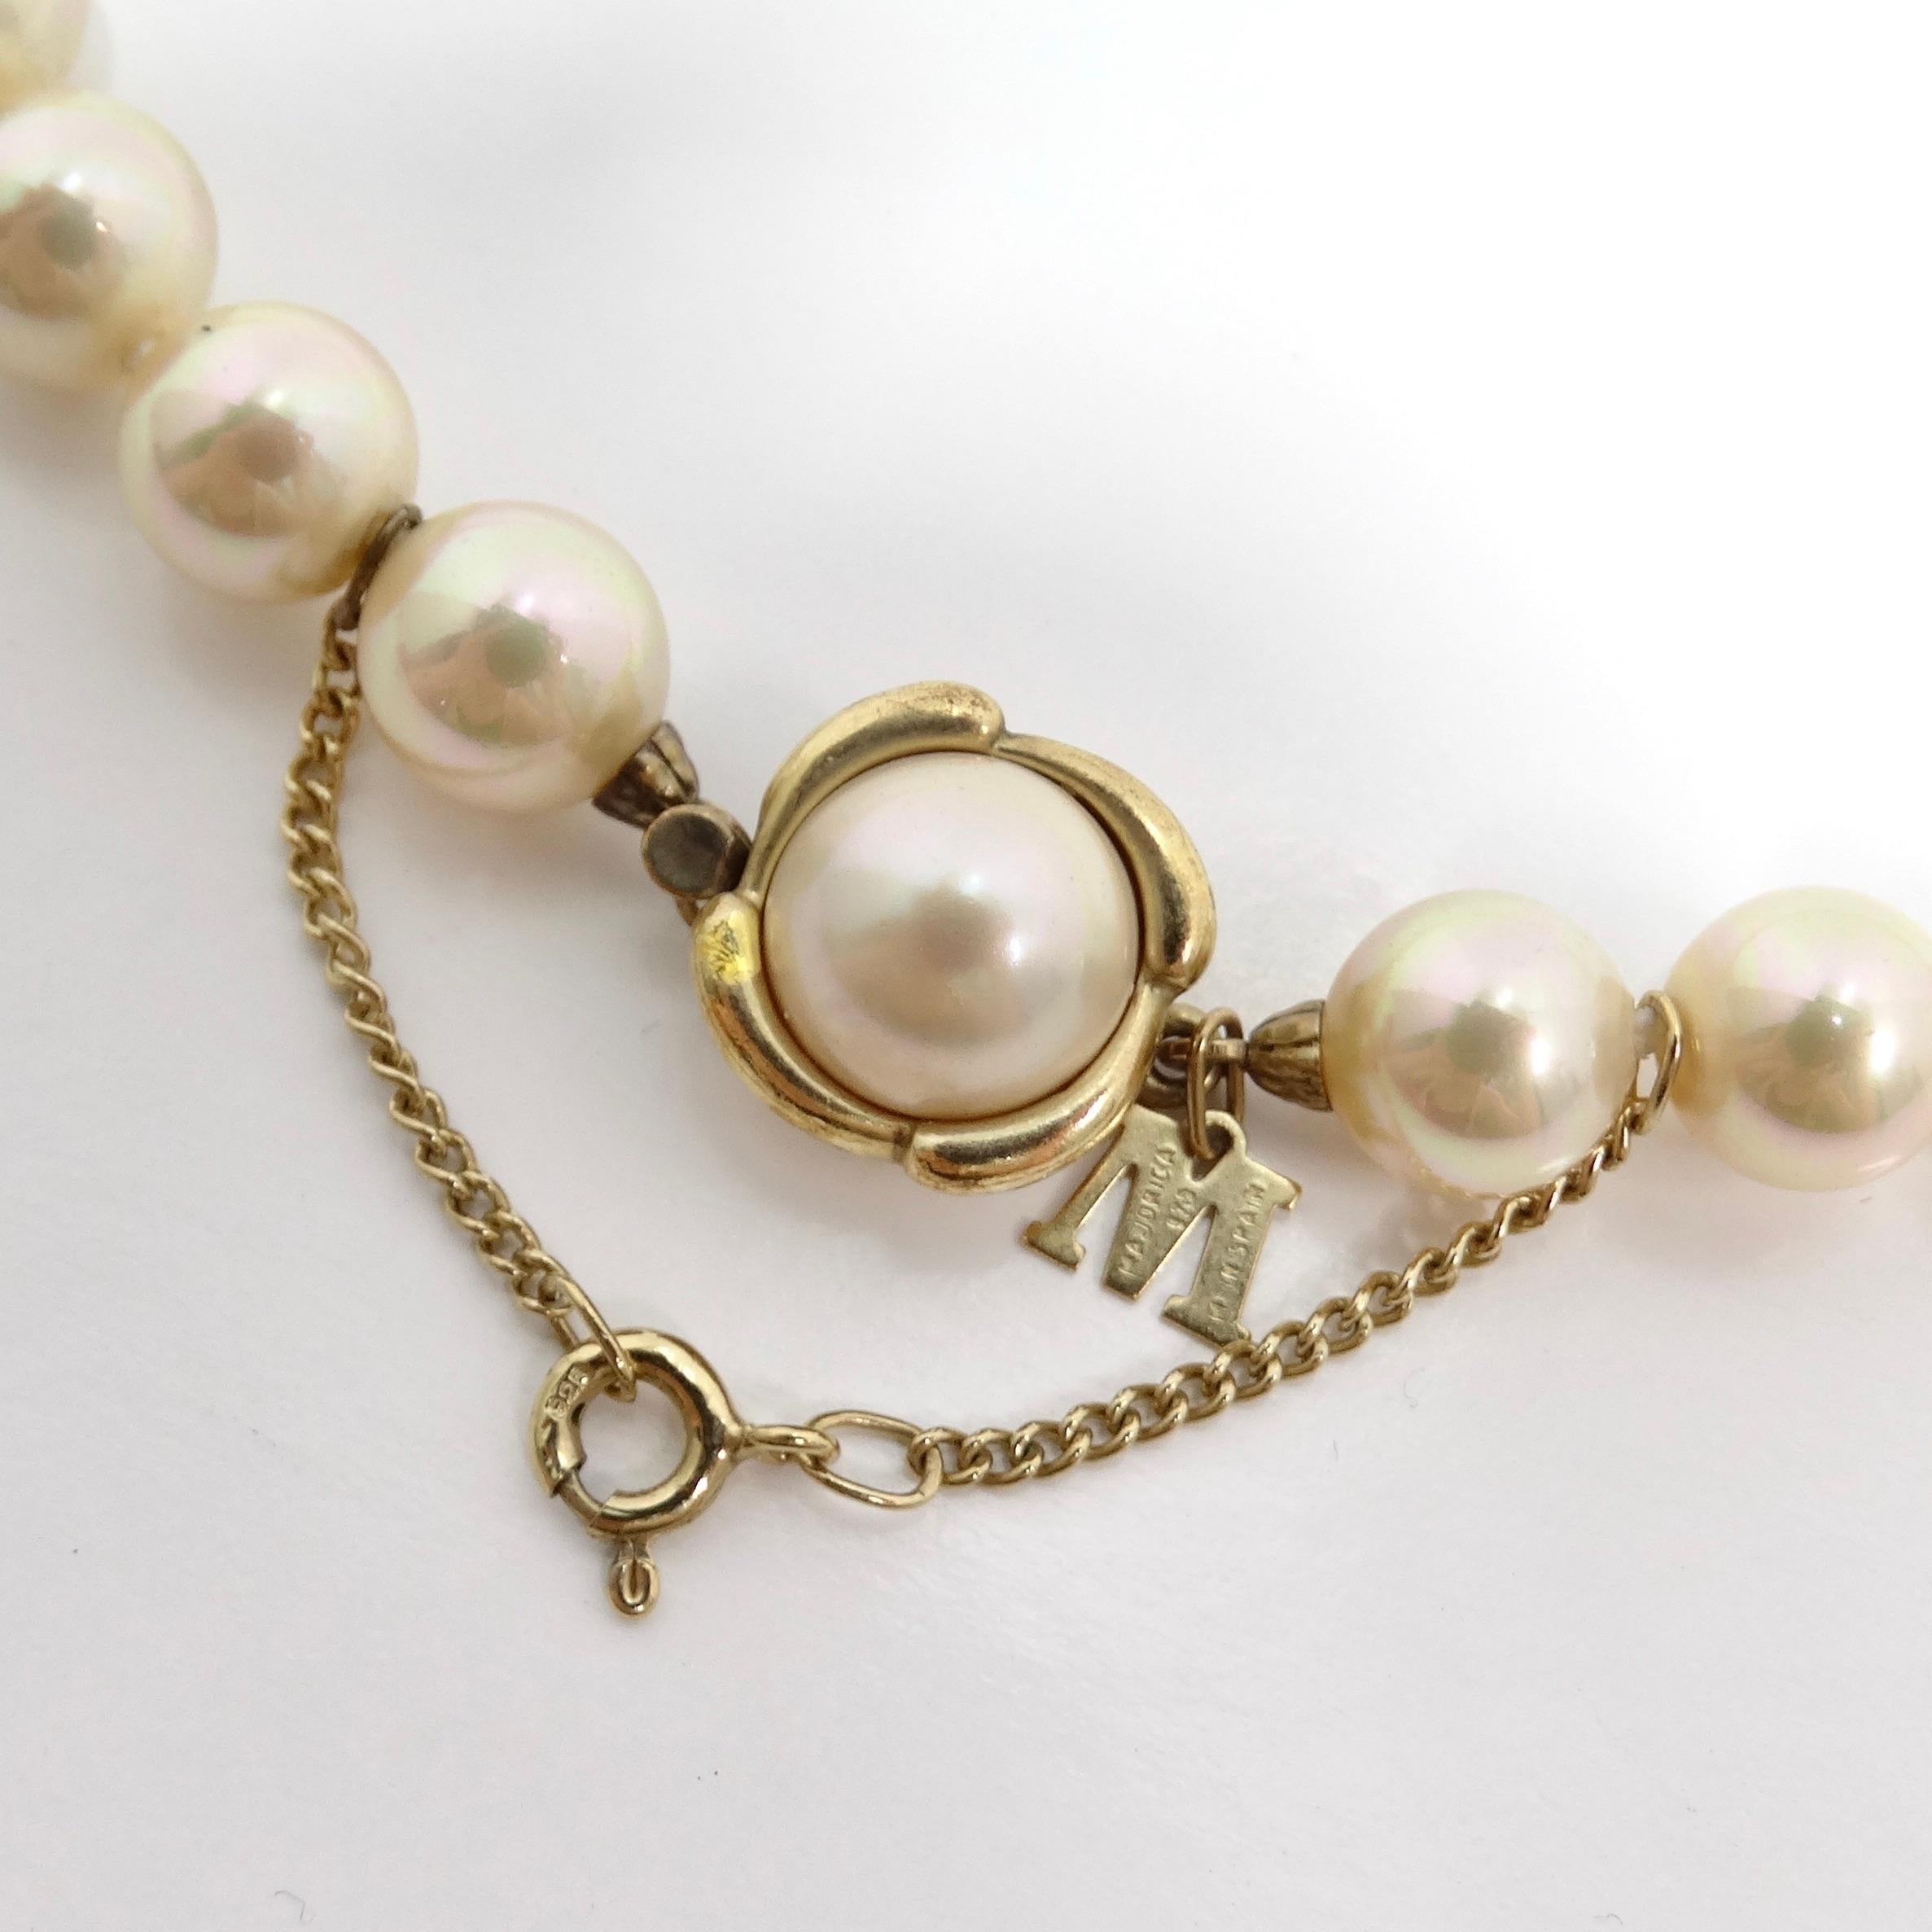 Majorca 1980s Silver Pearl Necklace In Good Condition For Sale In Scottsdale, AZ